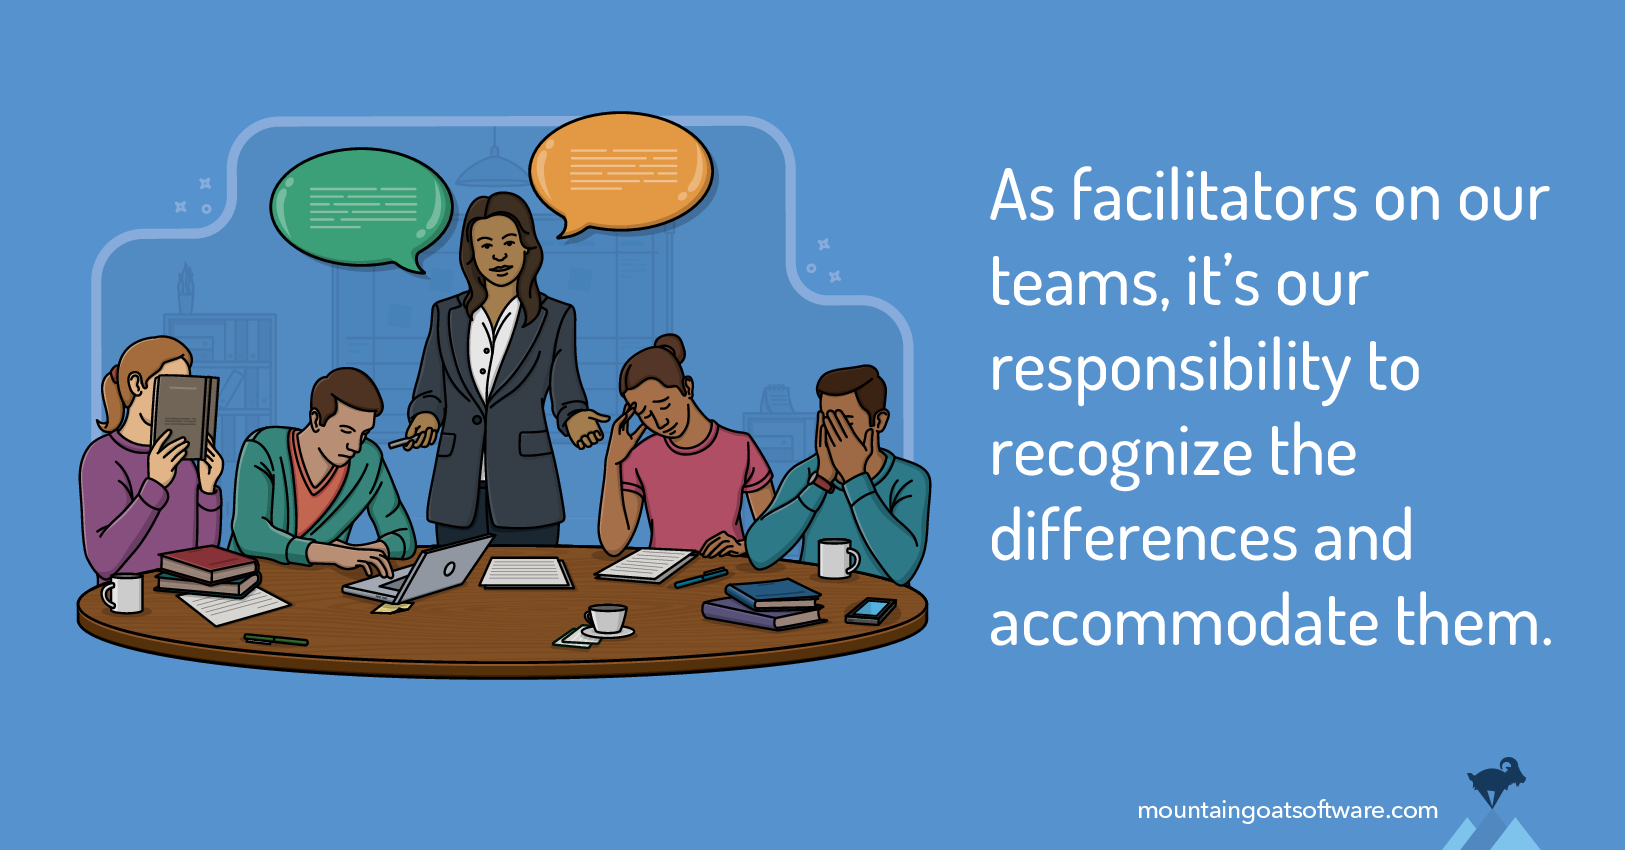 When agile teams work only on urgent issues, the results are not very satisfying